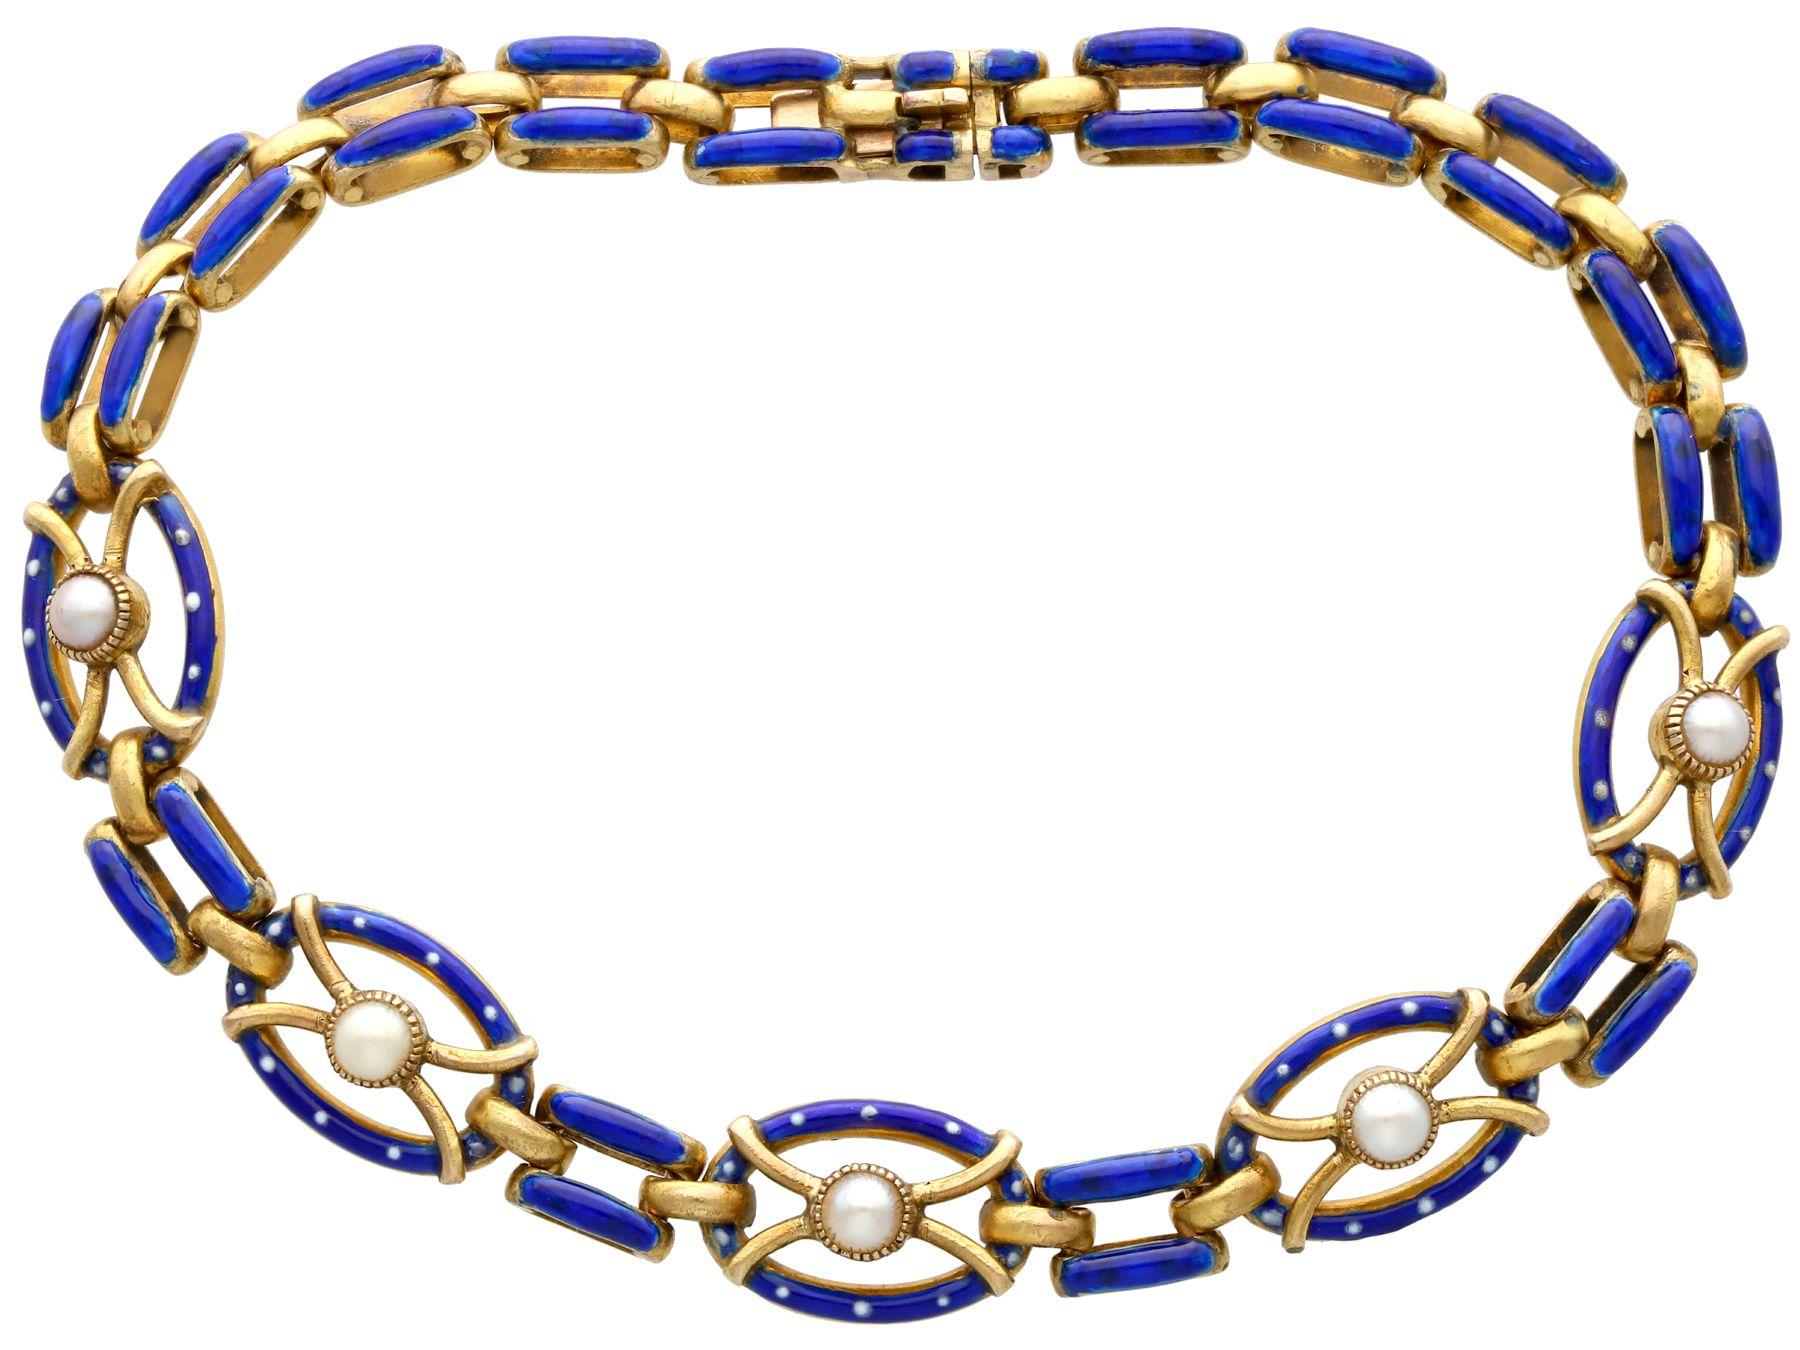 A stunning, fine and impressive antique seed pearl and hot enamel, 21 karat yellow gold gate bracelet; part of our diverse antique jewelry collections.

This stunning antique Victorian bracelet has been crafted in 21k yellow gold.

The five oval